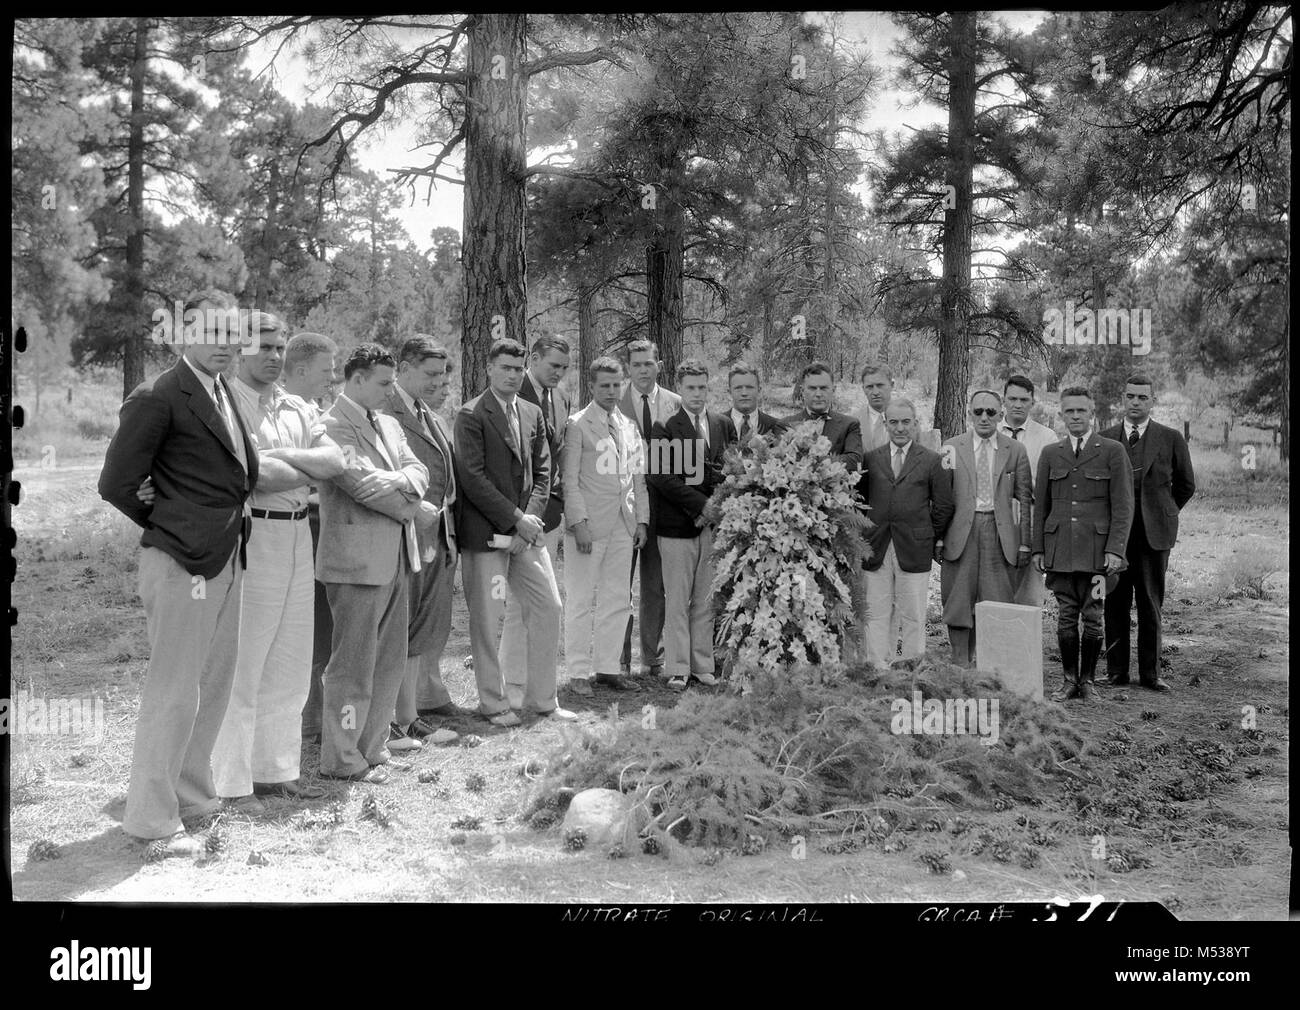 MEMBERS OF THE YALE, HARVARD & PRINCETON FOOTBALL TEAMS (ENROUTE TO THE LOS ANGELES OLYMPIC GAMES) PAY TRIBUTE TO ROBERT BINGHAM, FORMER YALE FOOTBALL PLAYER, & GRCA FOREST RESERVE RANGER. (1919) GRCA CEMETERY. JULY 1932 .  First used before the establishment of the national park but not formally dedicated until 1928, the cemetery serves as a resting place for many early Grand Canyon families and pioneers. The cemetery—part of the Grand Canyon Village National Historic District—has more than 390 individual graves, several of which date back to before the establishment of the park and the dedic Stock Photo